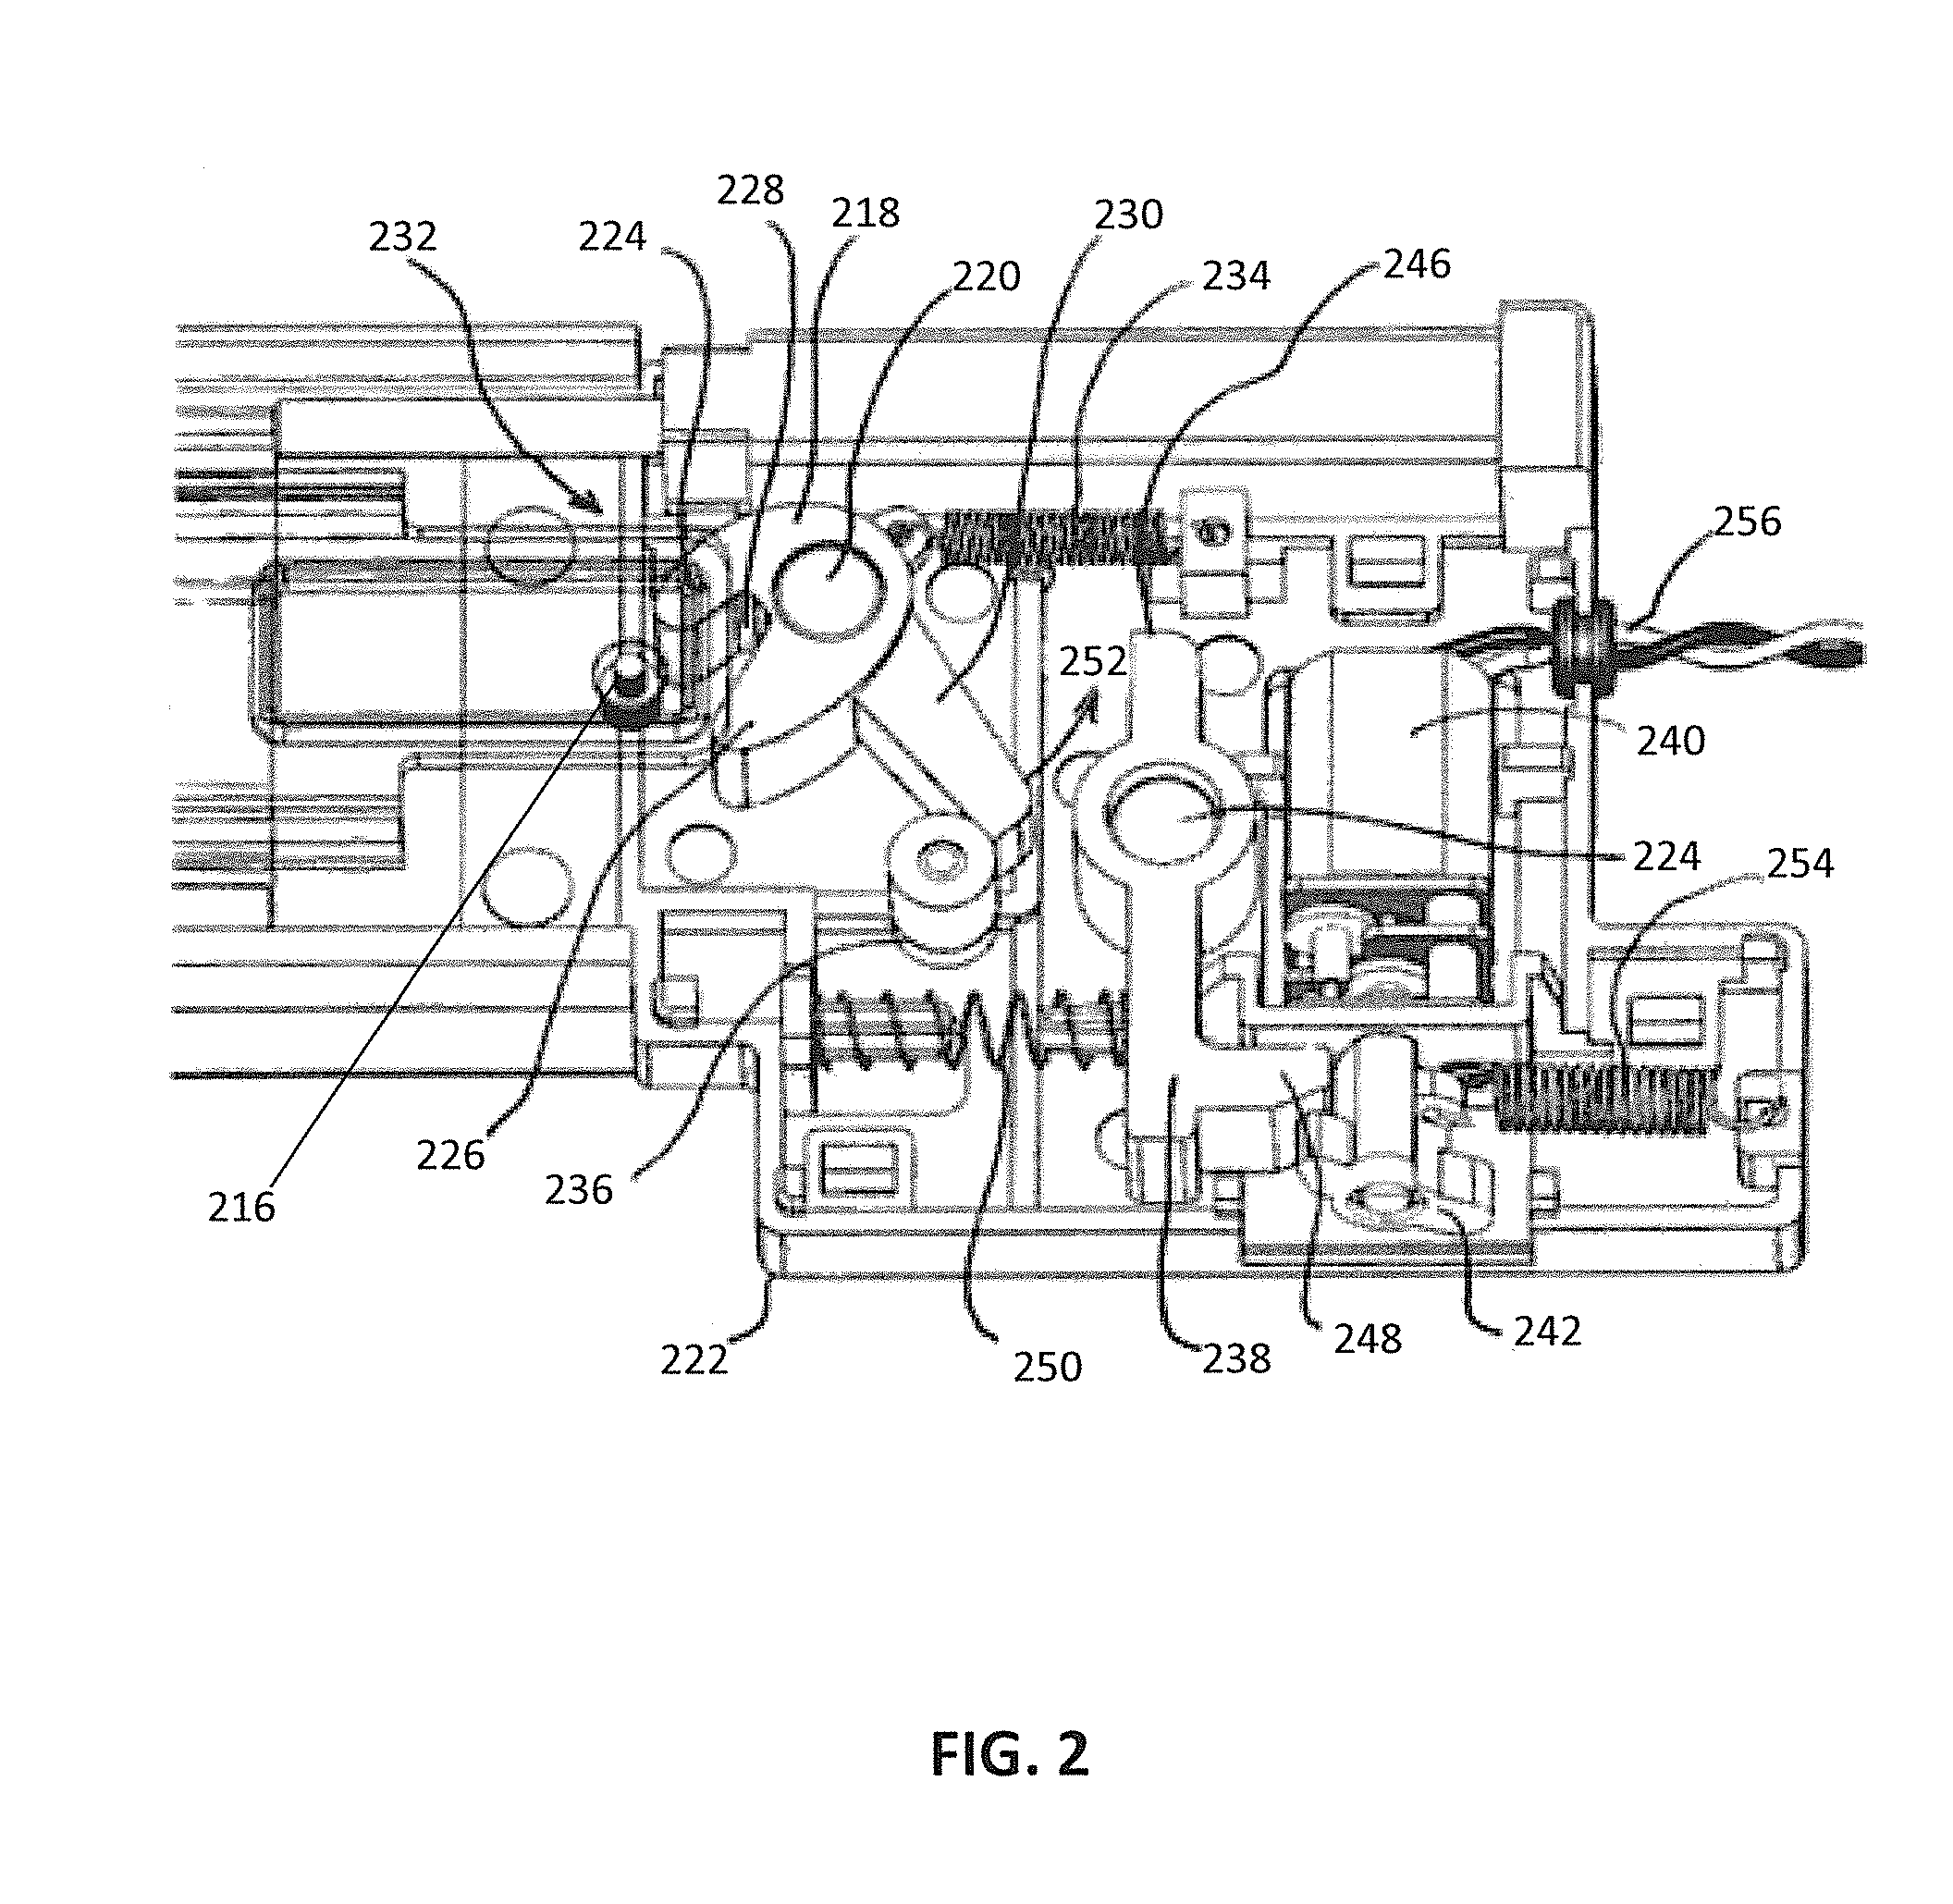 Drawer slide and electronically actuated locking mechanism